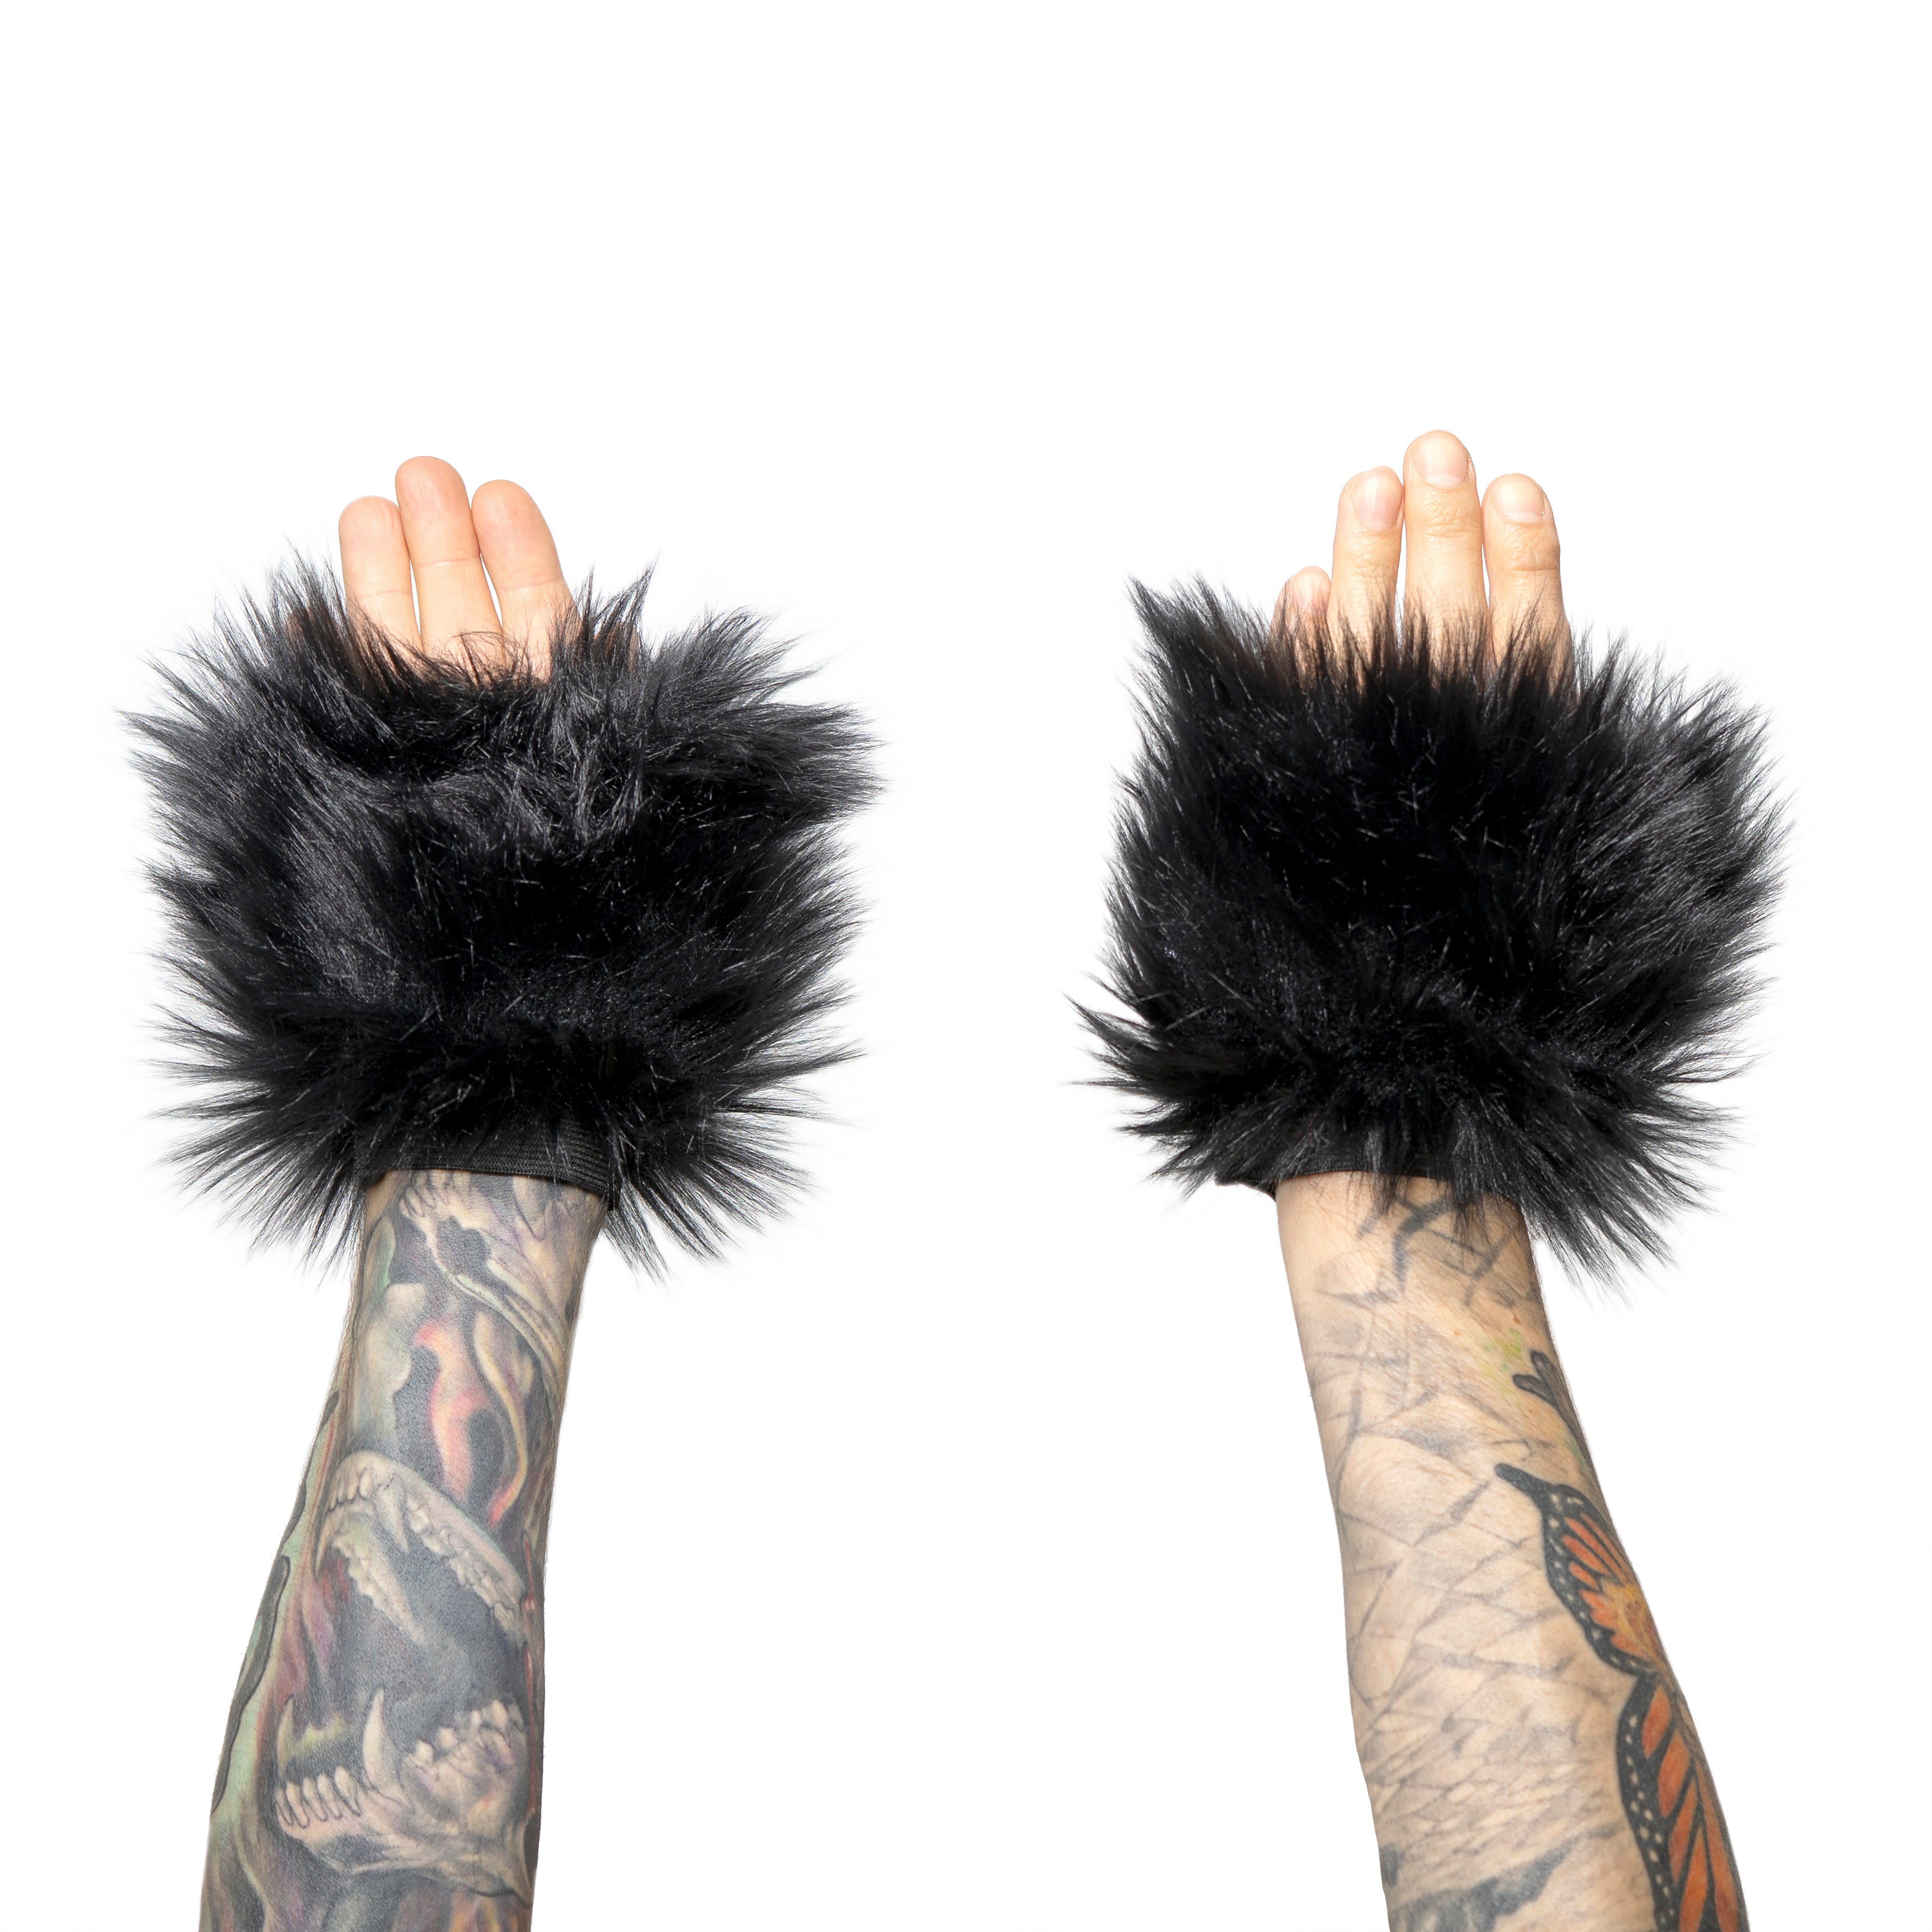 black Monster Fur Fluffy Cuffs by Pawstar! Furry wrist cuffs made from faux fur for raves, cosplays, halloween, music festivals, and more.